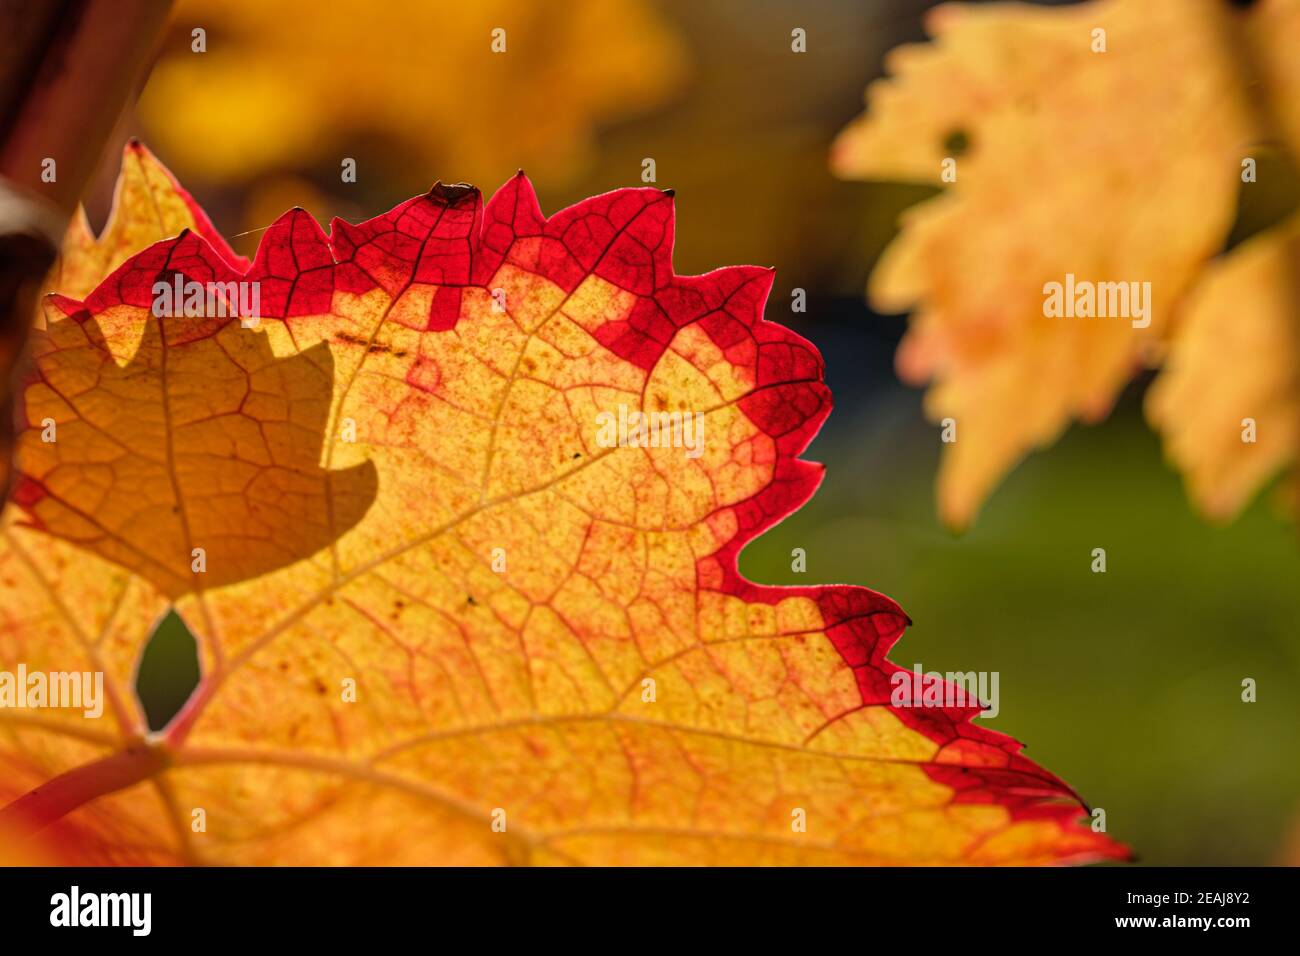 Close-up of red orange gape leaf with vines Stock Photo